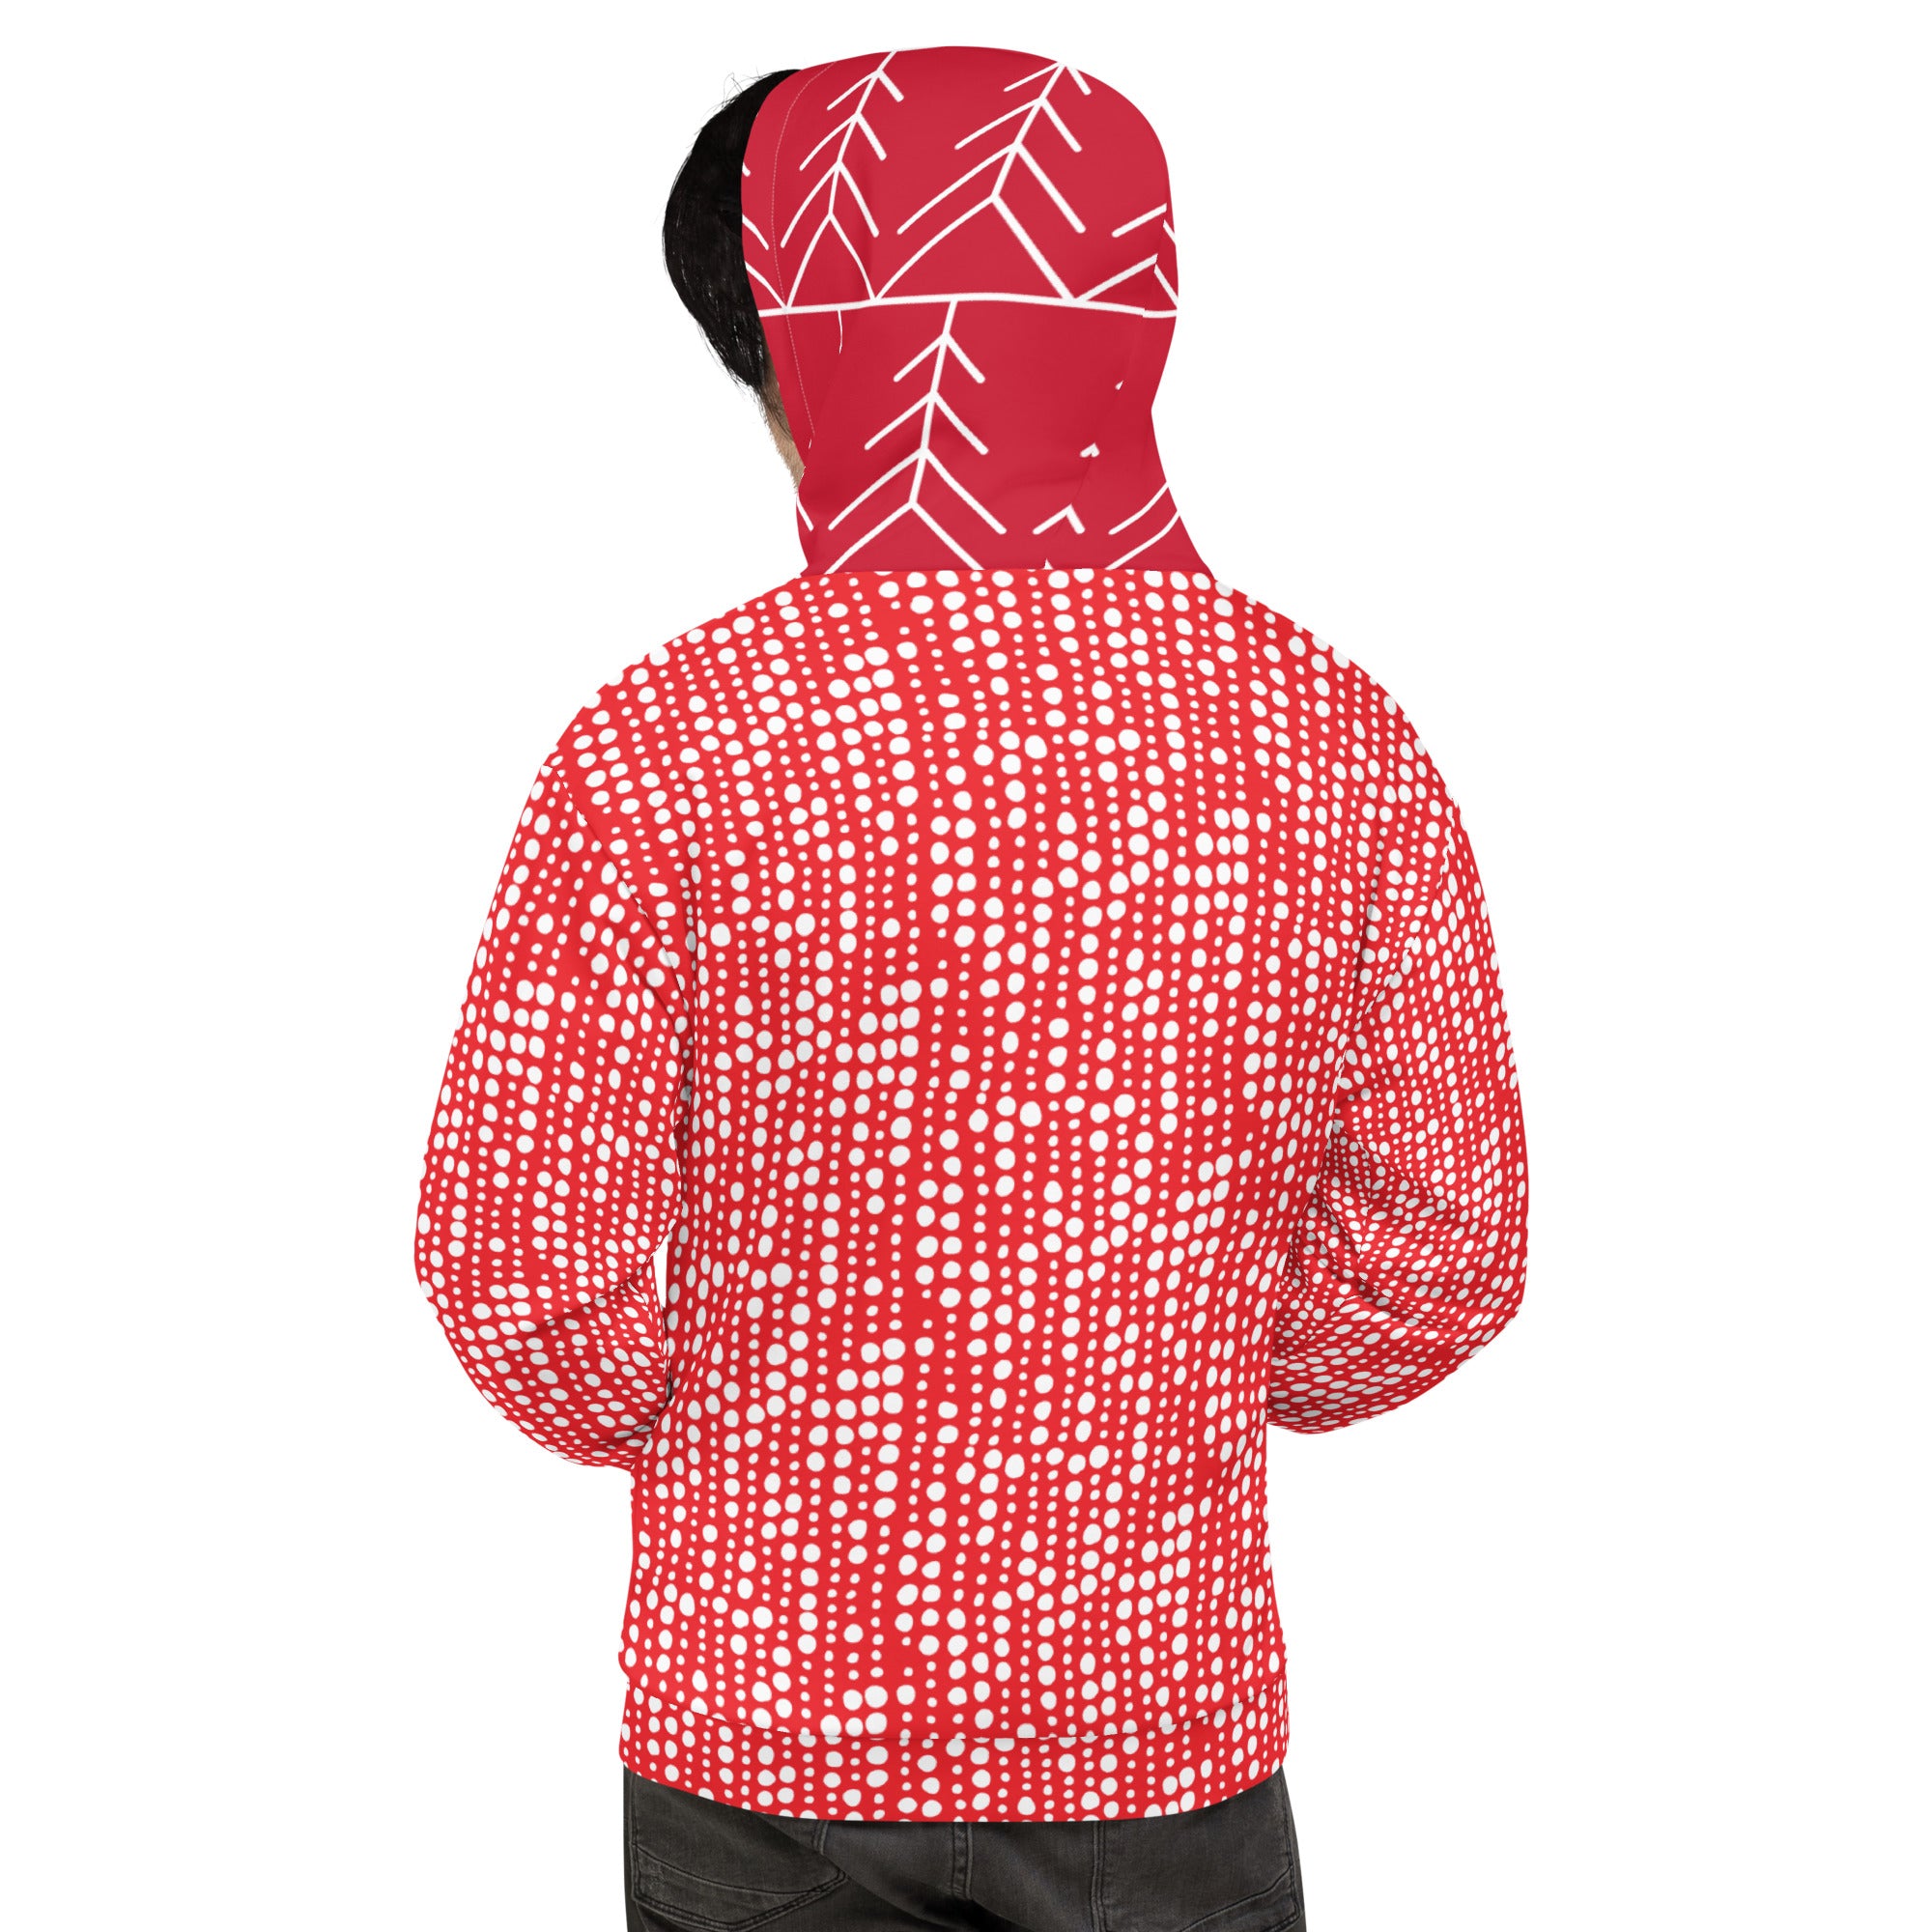 Buy All about the Red Unisex Hoodie - Stylish Comfort at DIANES DELIGHT FUL PRINTS